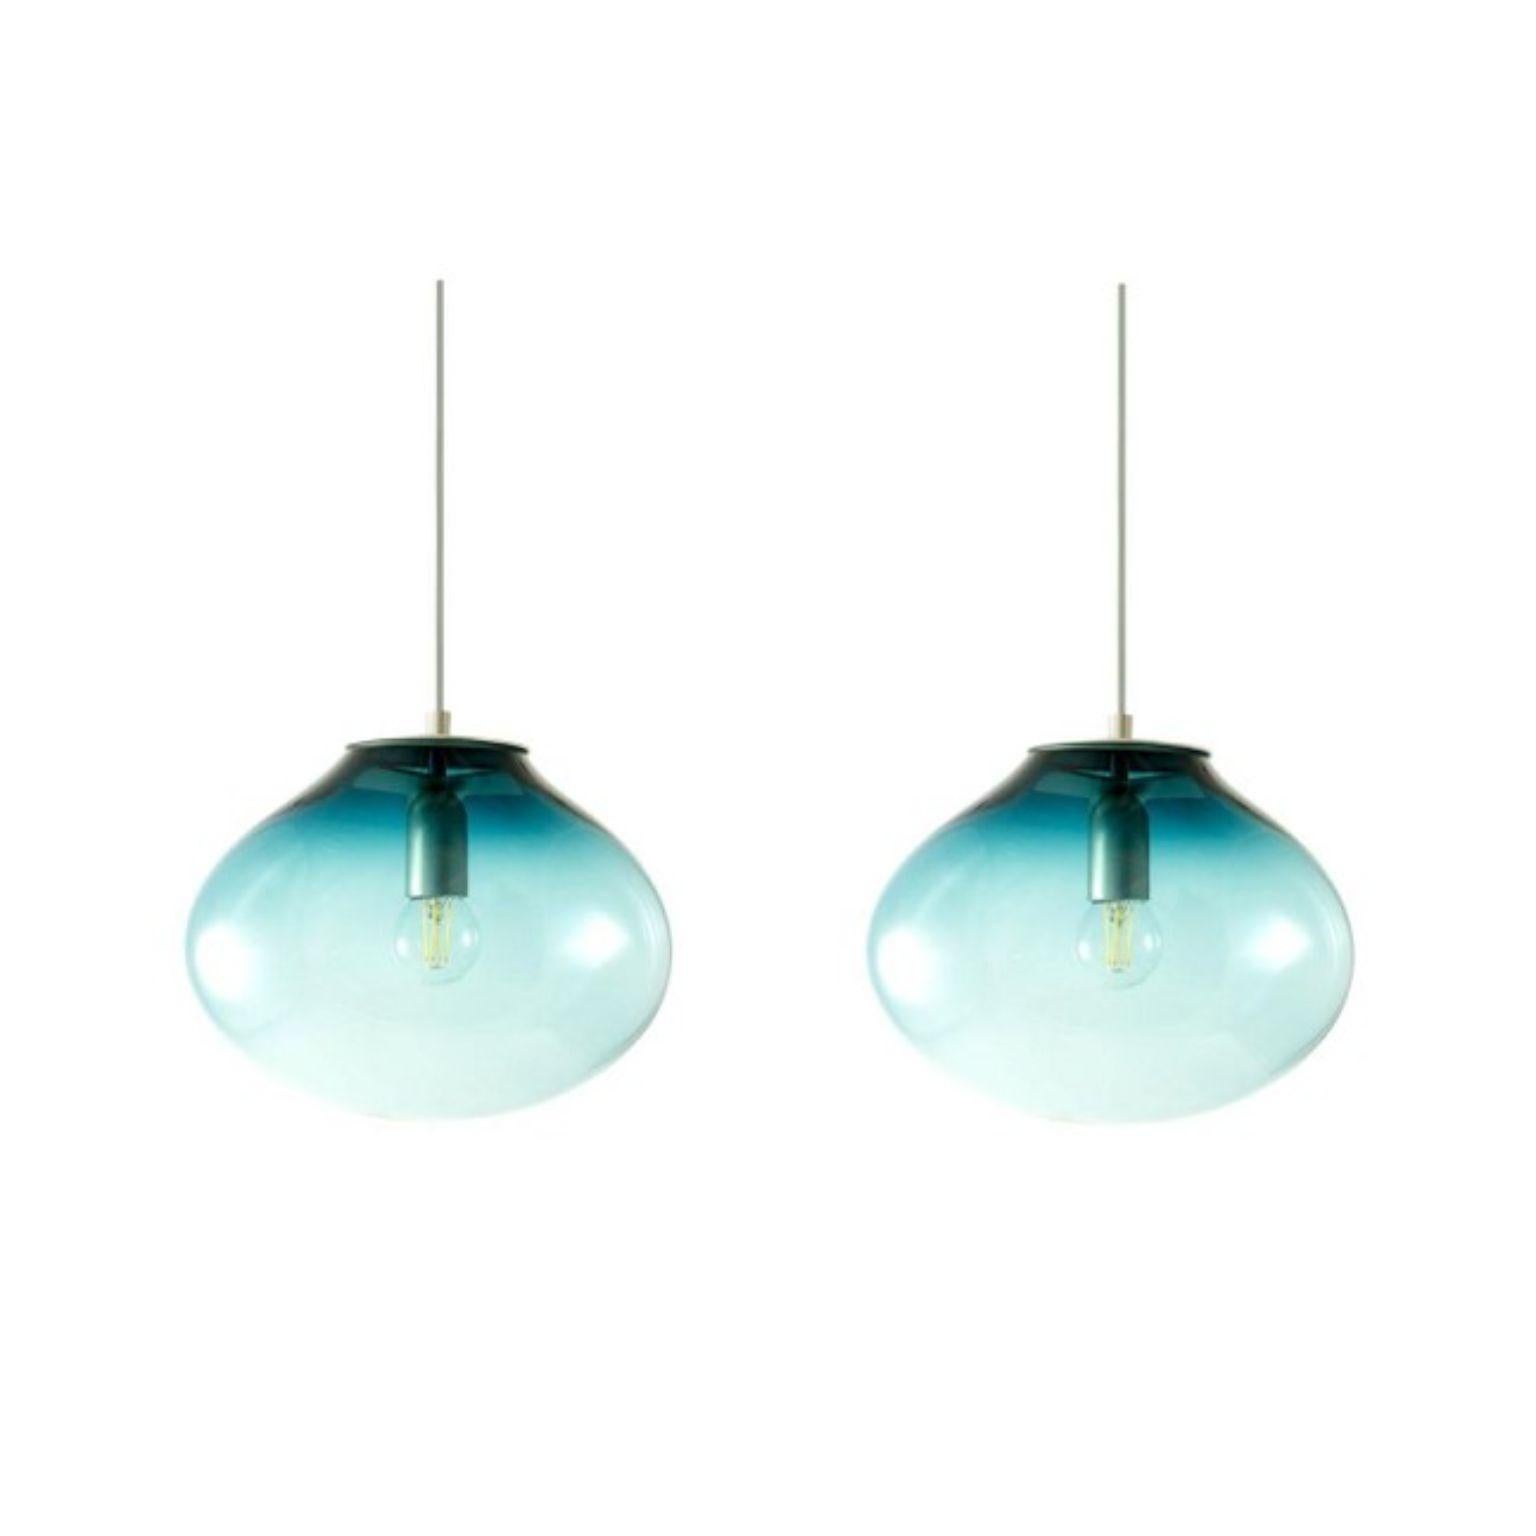 Set of 2 Planetoide Palasi petrol pendants by ELOA
No UL listed 
Material: glass, steel, silver, LED Bulb
Dimensions: D30 x W30 x H250 cm
Also available in different colours and dimensions.

All our lamps can be wired according to each country. If